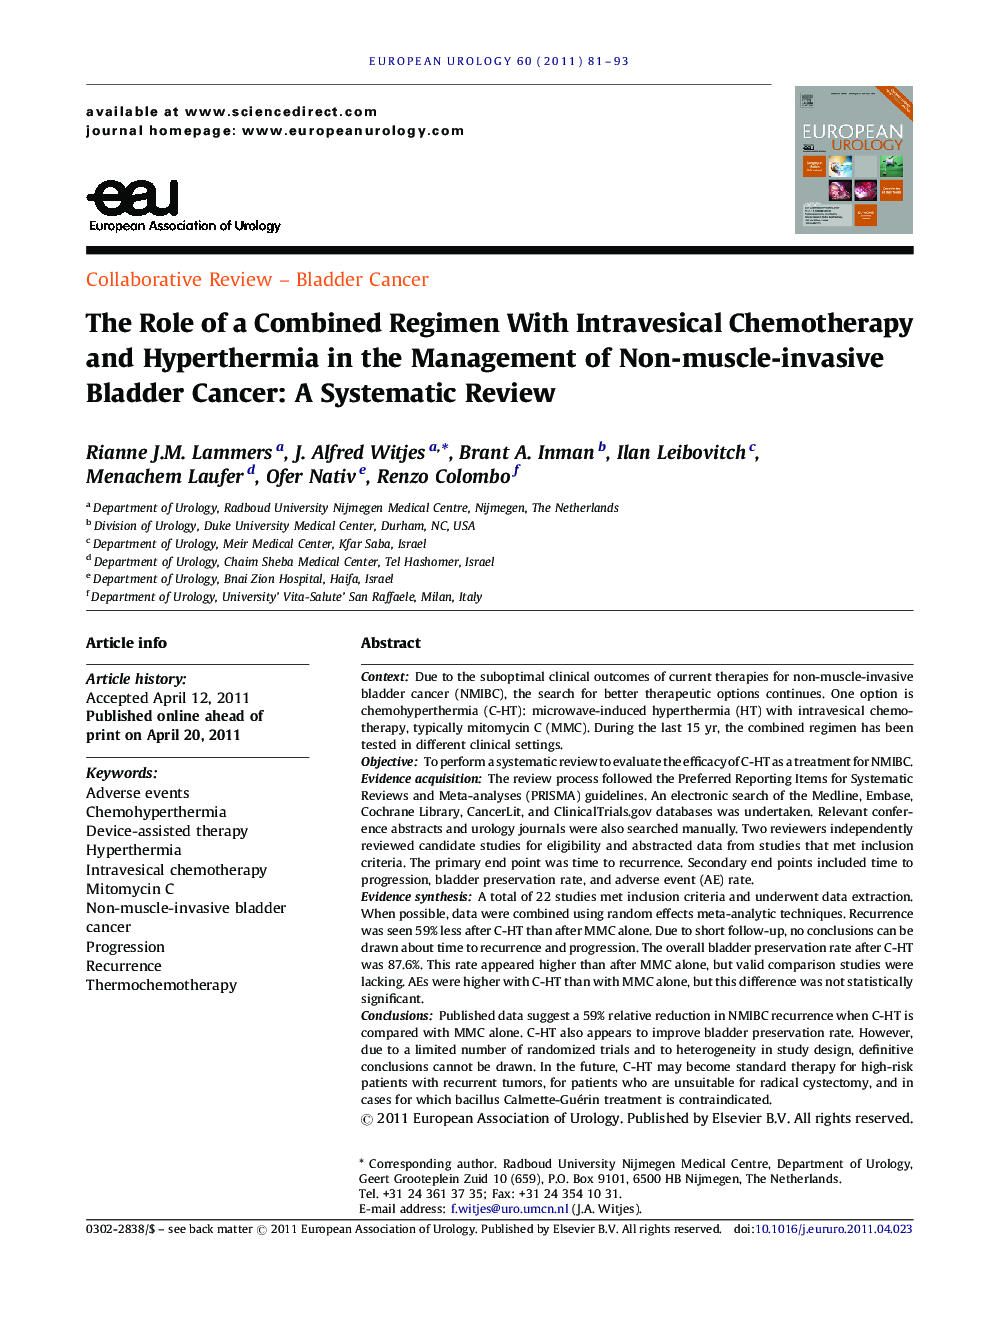 The Role of a Combined Regimen With Intravesical Chemotherapy and Hyperthermia in the Management of Non-muscle-invasive Bladder Cancer: A Systematic Review